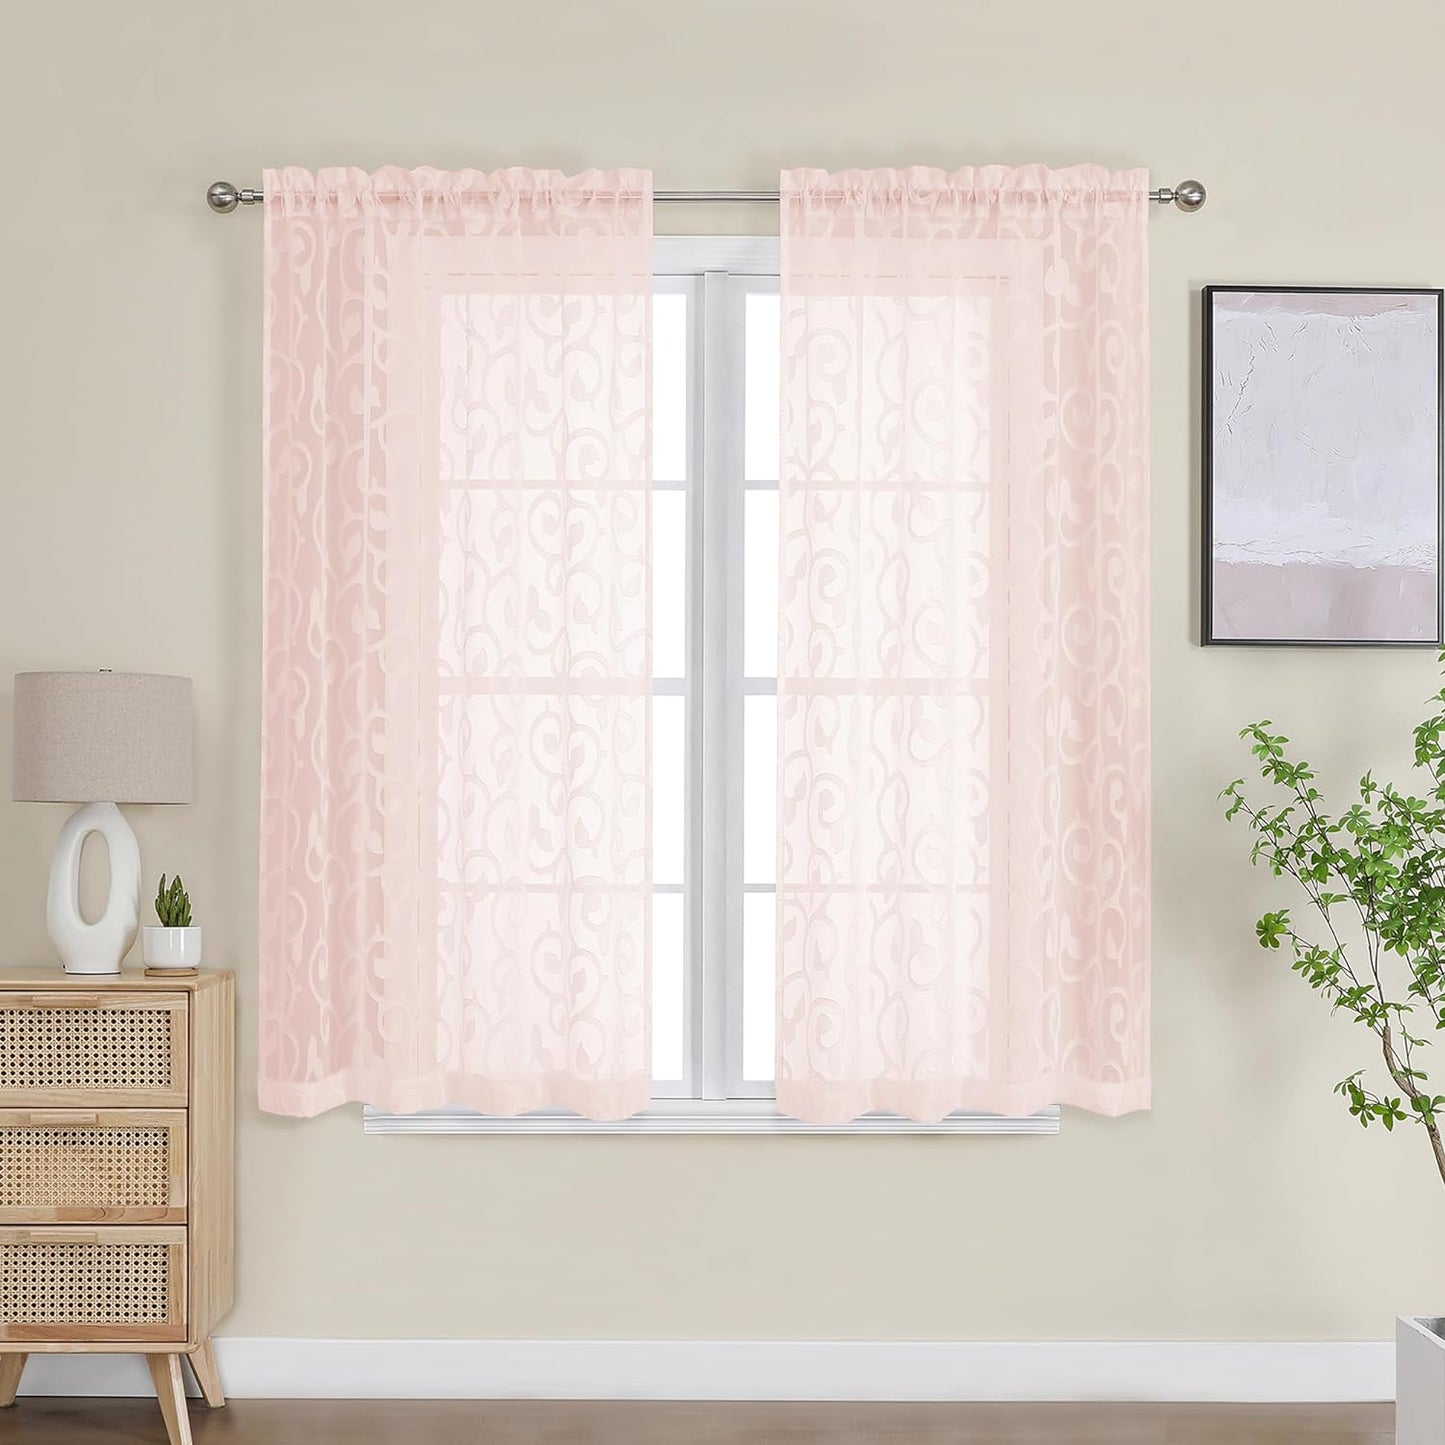 OWENIE Furman Sheer Curtains 84 Inches Long for Bedroom Living Room 2 Panels Set, Light Filtering Window Curtains, Semi Transparent Voile Top Dual Rod Pocket, Grey, 40Wx84L Inch, Total 84 Inches Width  OWENIE Blush 40W X 45L 